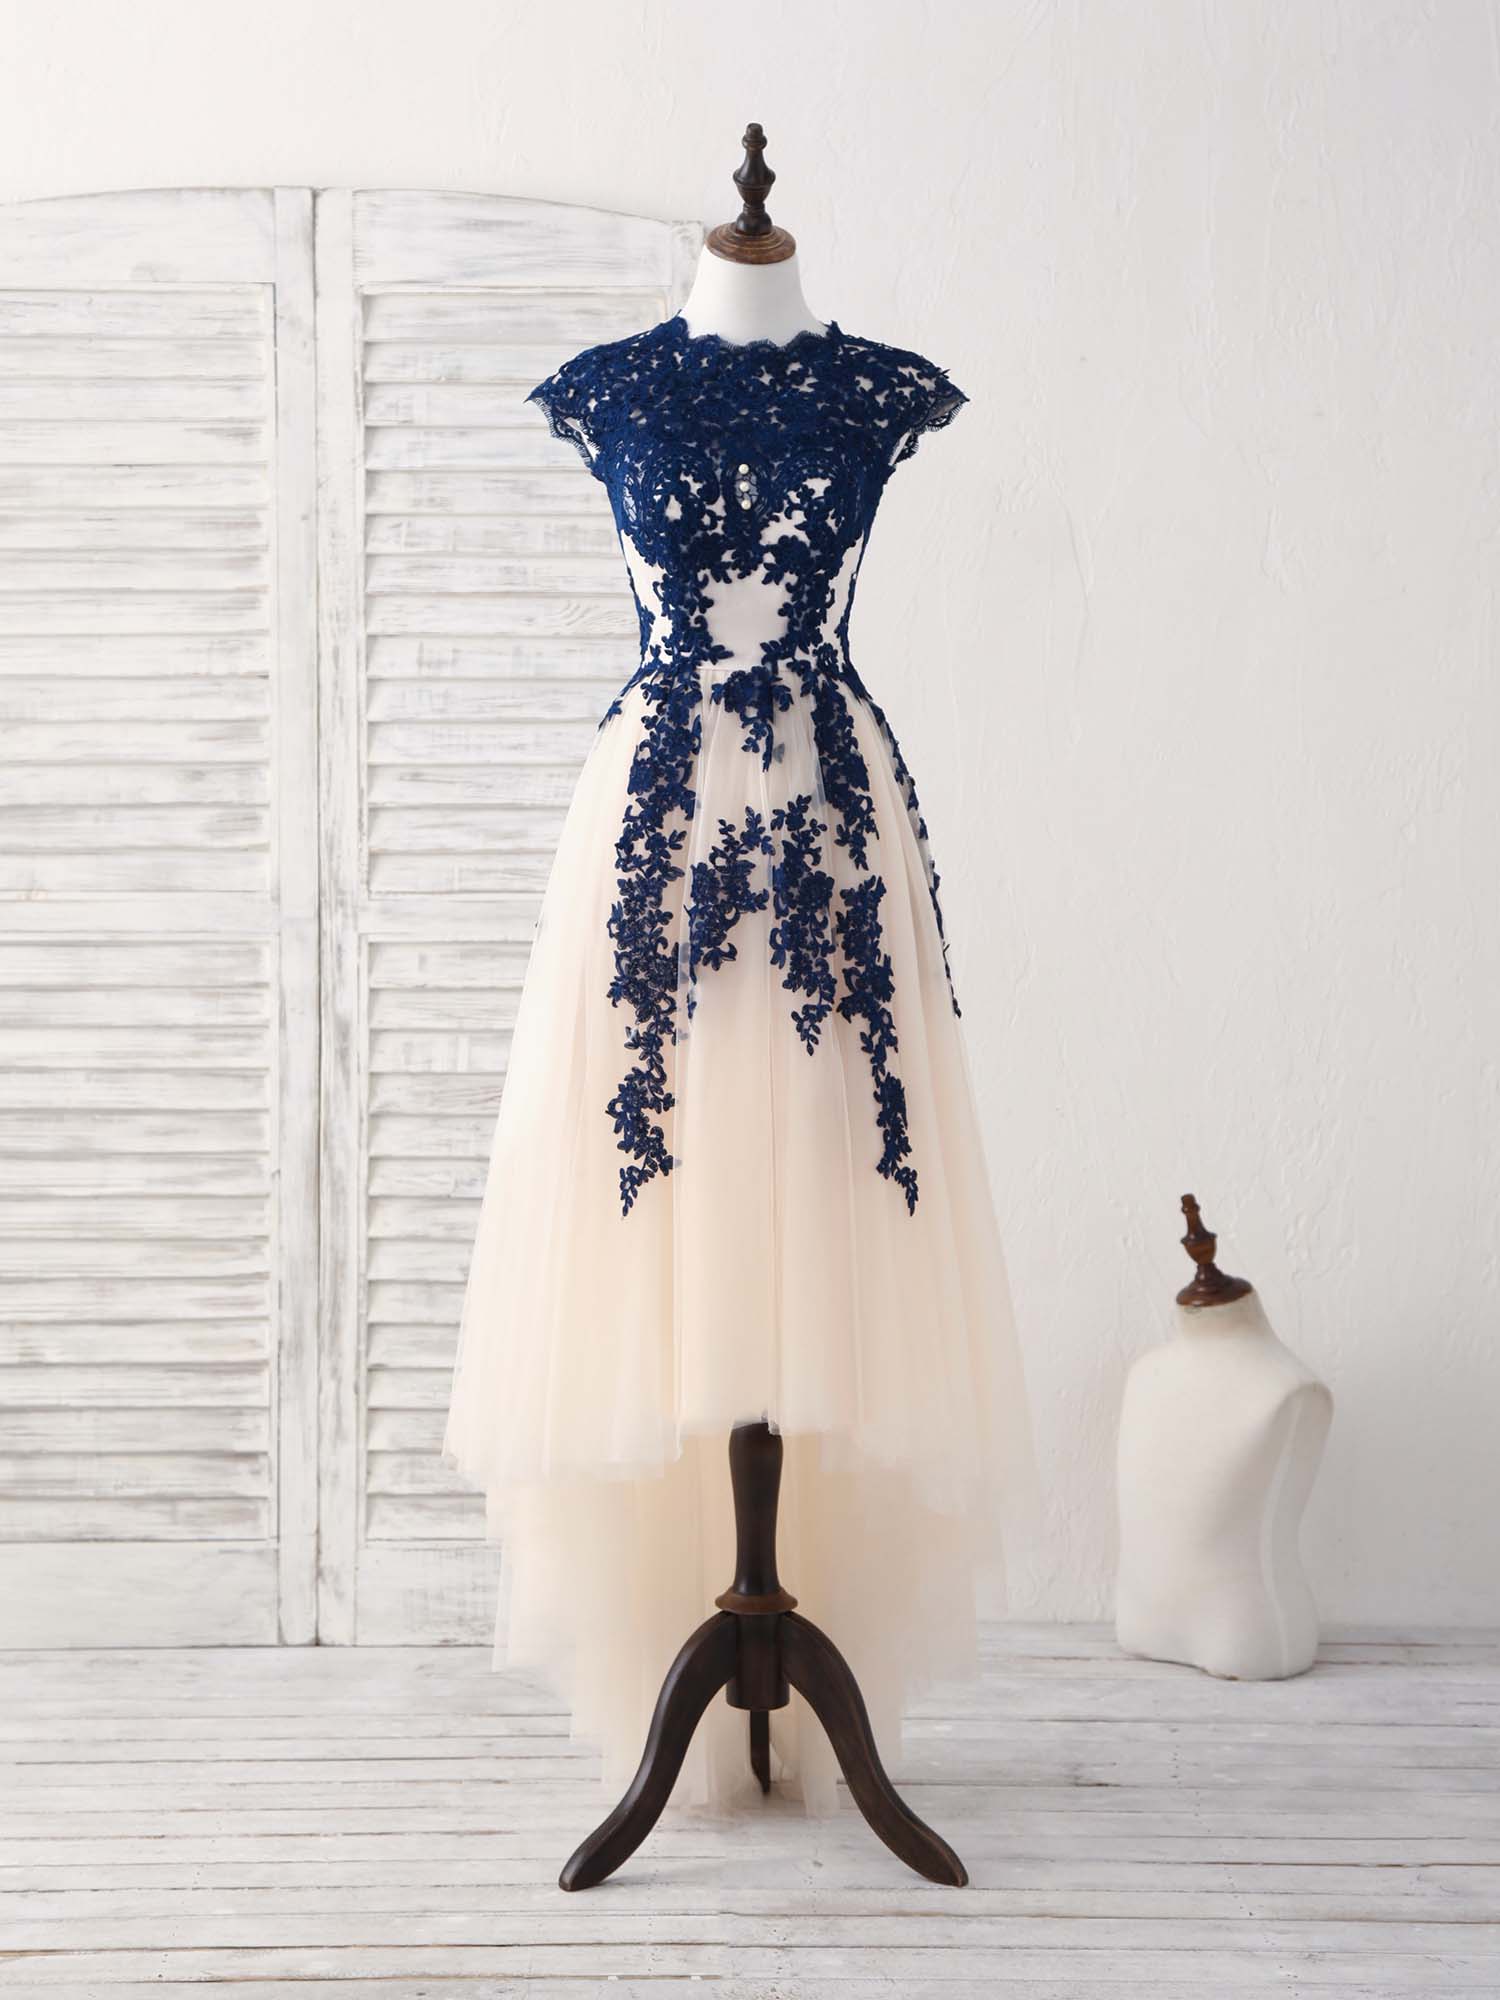 Bridesmaid Propos, Dark Blue Lace Tulle High Low Prom Dress Blue Bridesmaid Dress